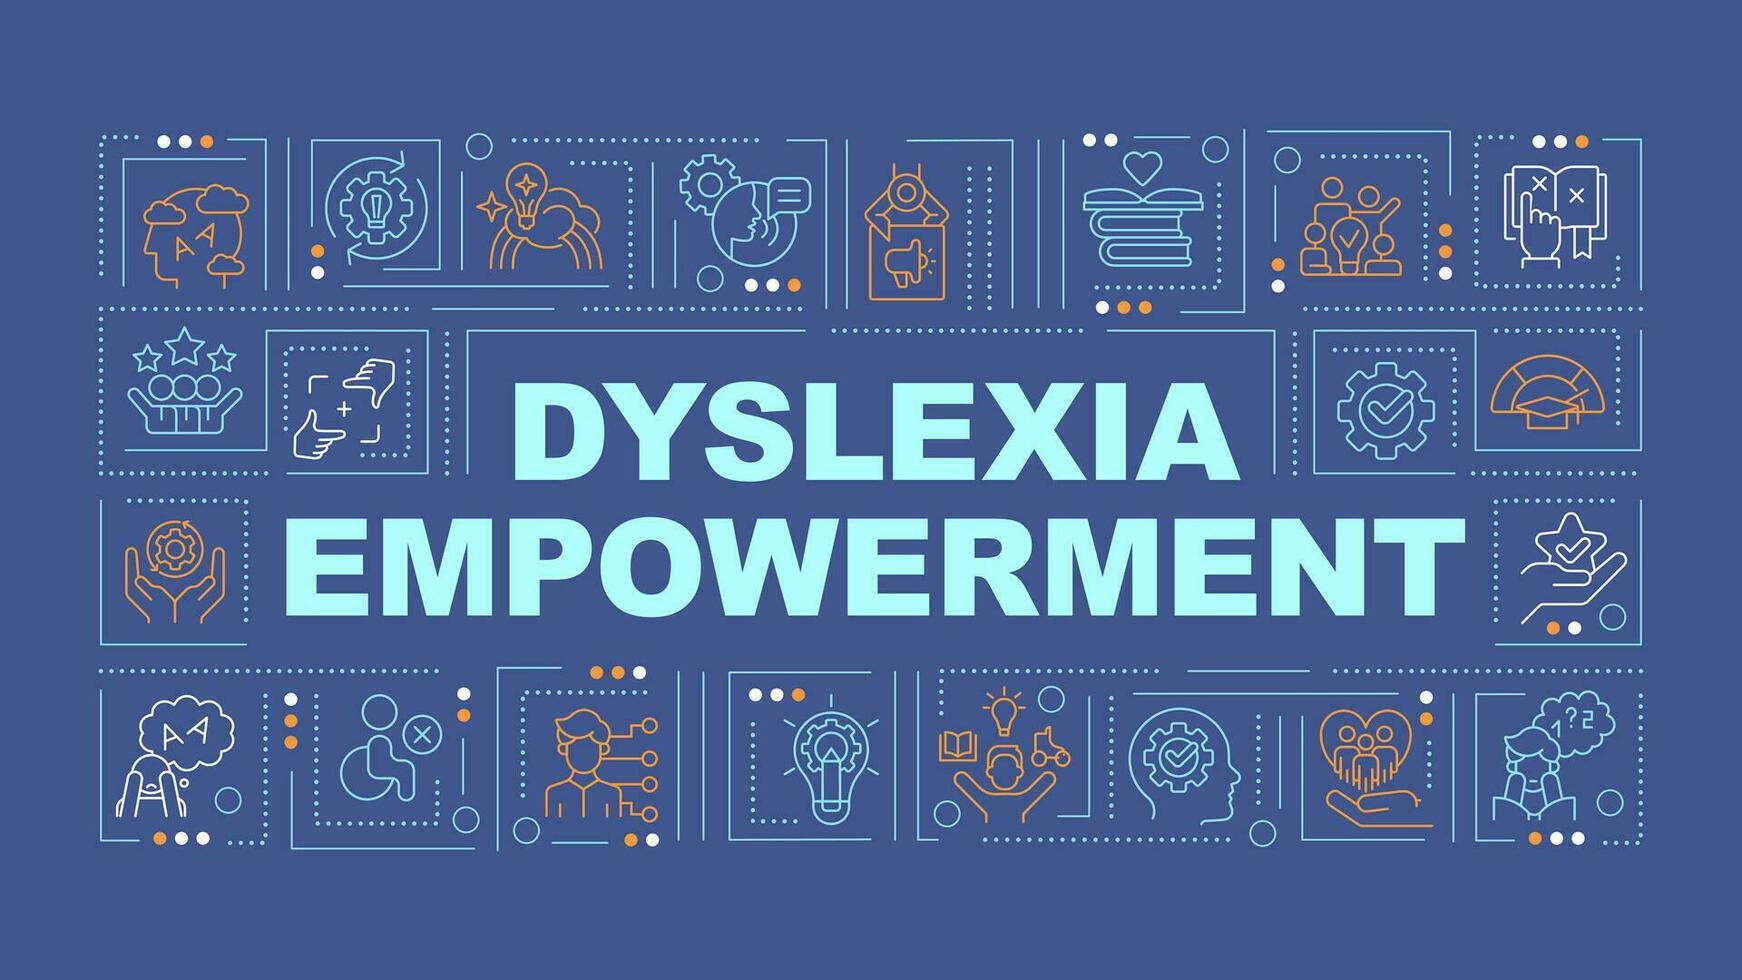 Dyslexia empowerment text with various thin line icons concept on dark blue monochromatic background, editable 2D vector illustration.